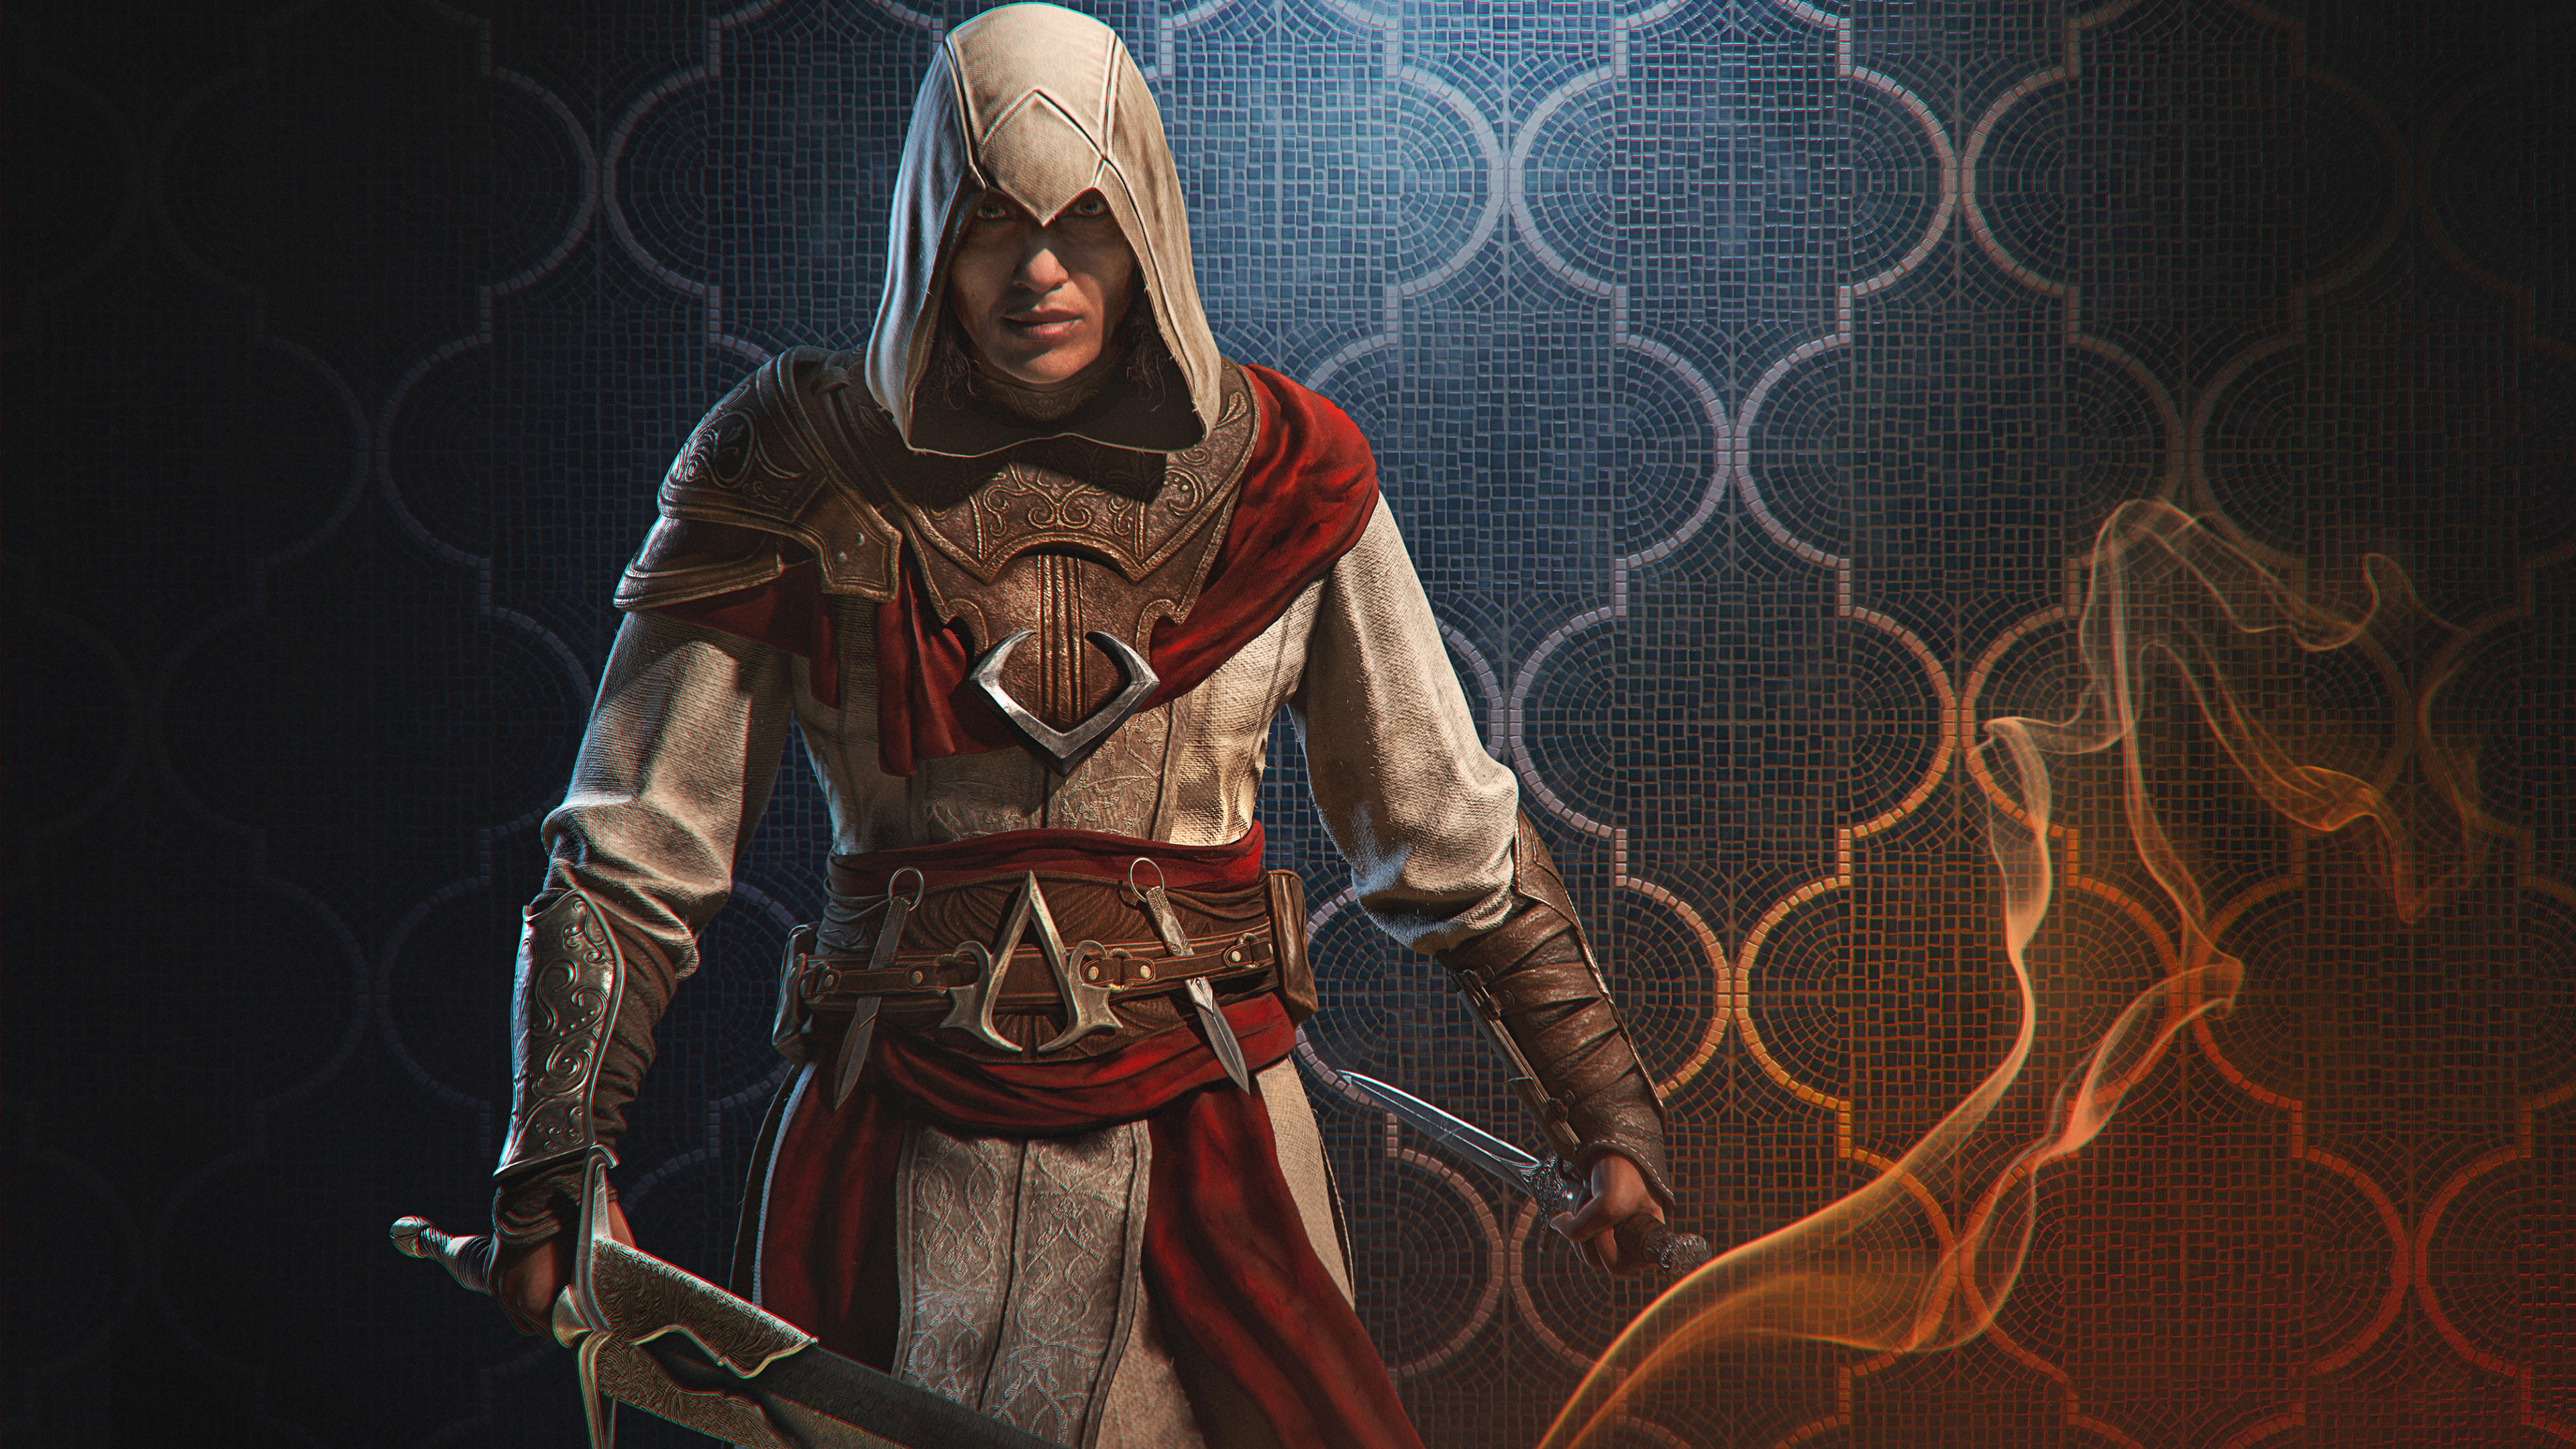 General 3840x2160 Assassin's Creed Mirage 4K Assassin's Creed Ubisoft video games video game men video game characters Basim (Assassin's Creed)